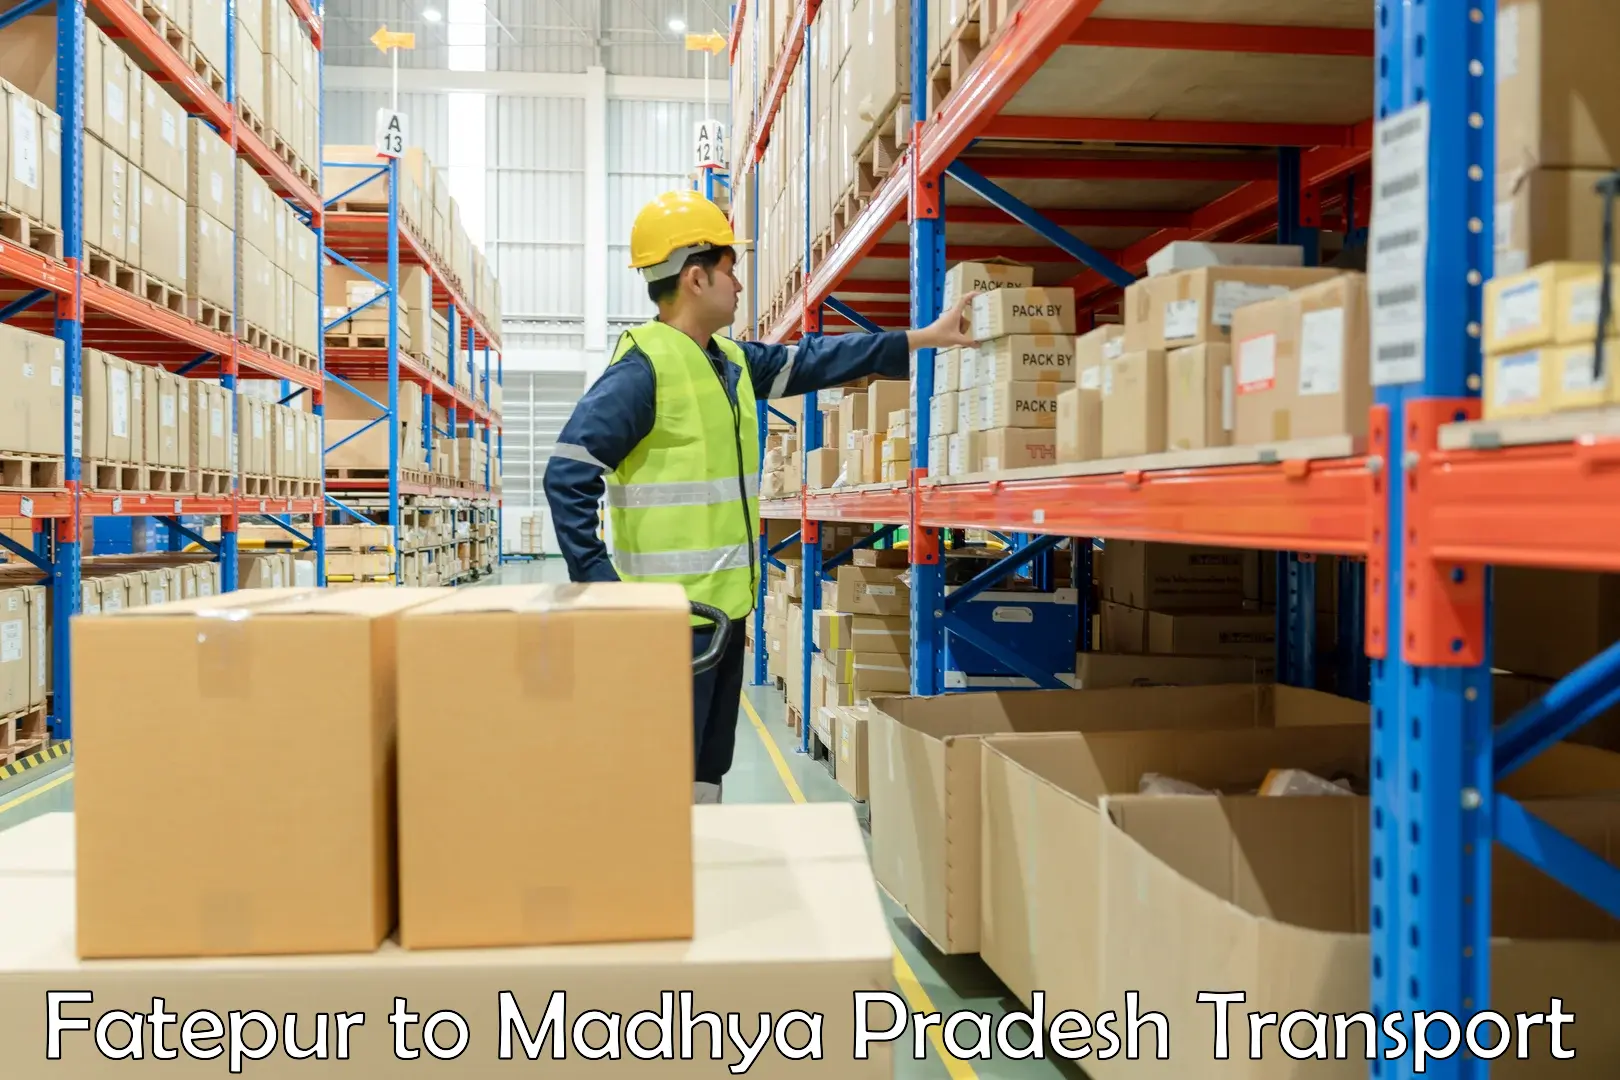 Truck transport companies in India Fatepur to Khandwa